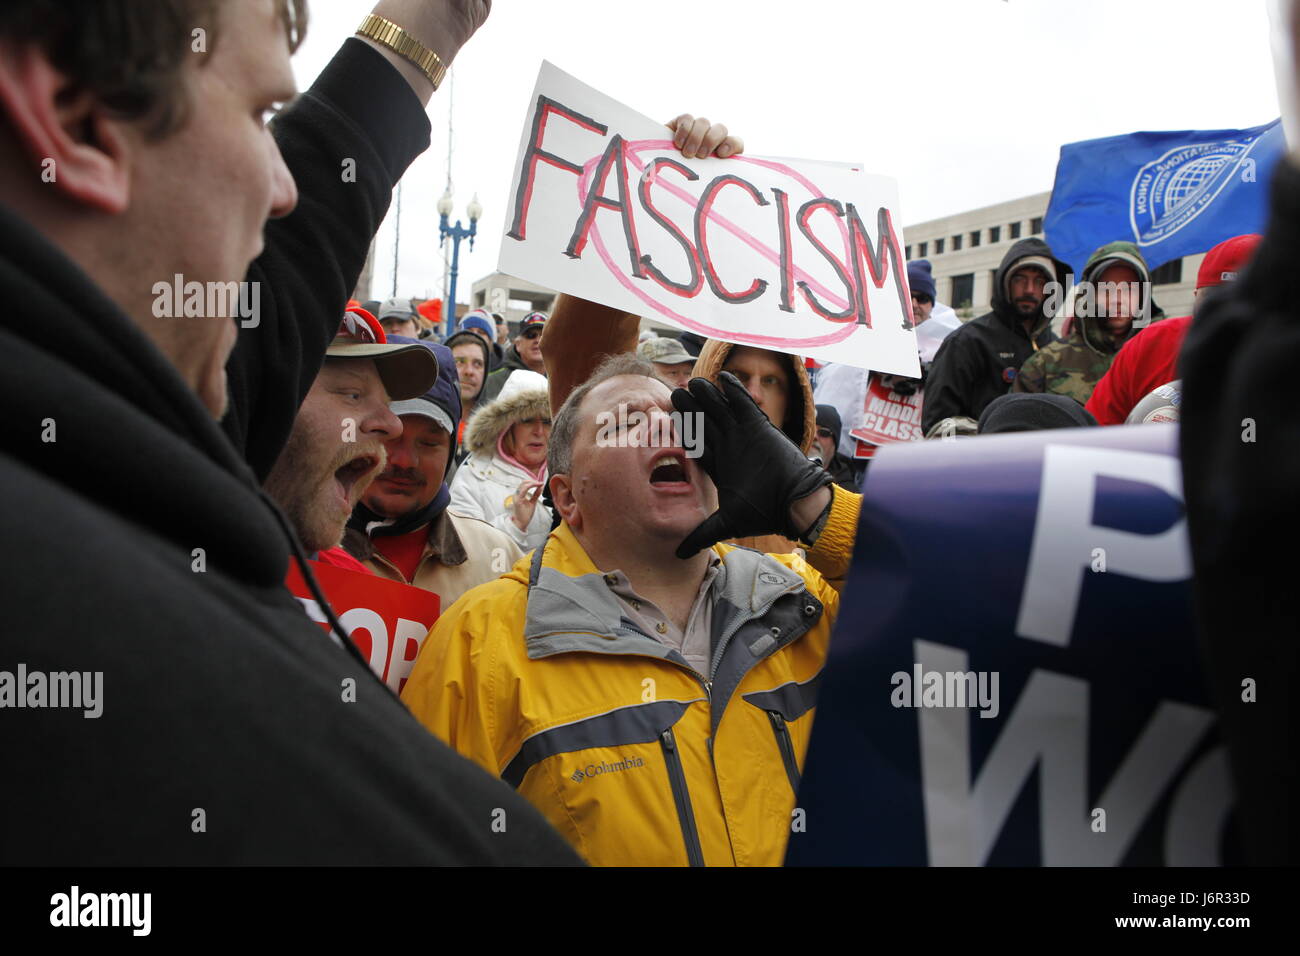 An anti-union agitator, center, who would only give his name as Ron and who said he is from Carmel is surrounded by angry union members as he shouts anti-union slogans during a rally attended by thousands of Union supporters and members at the Indiana Statehouse. Stock Photo